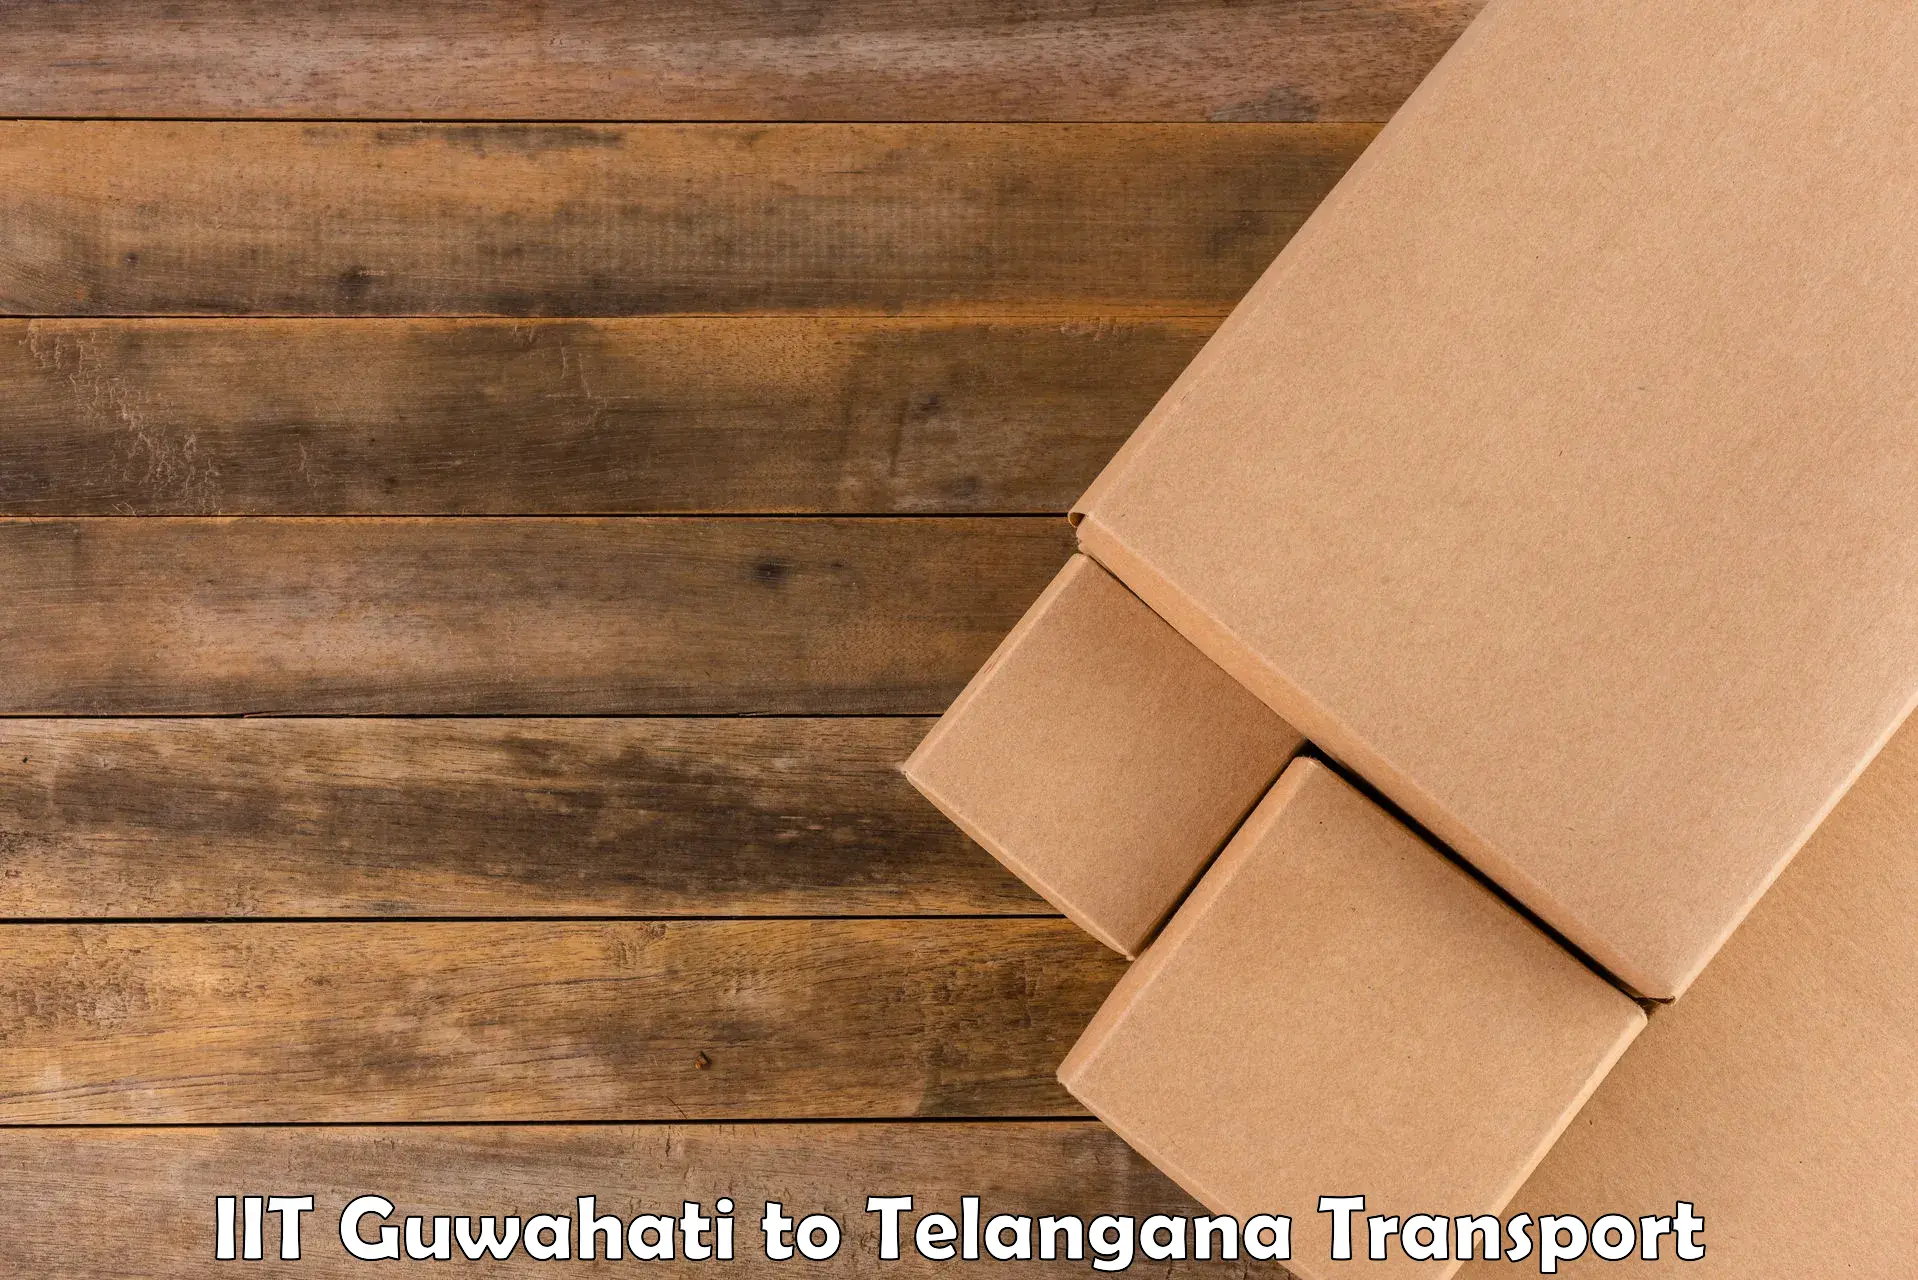 Air freight transport services IIT Guwahati to Adilabad